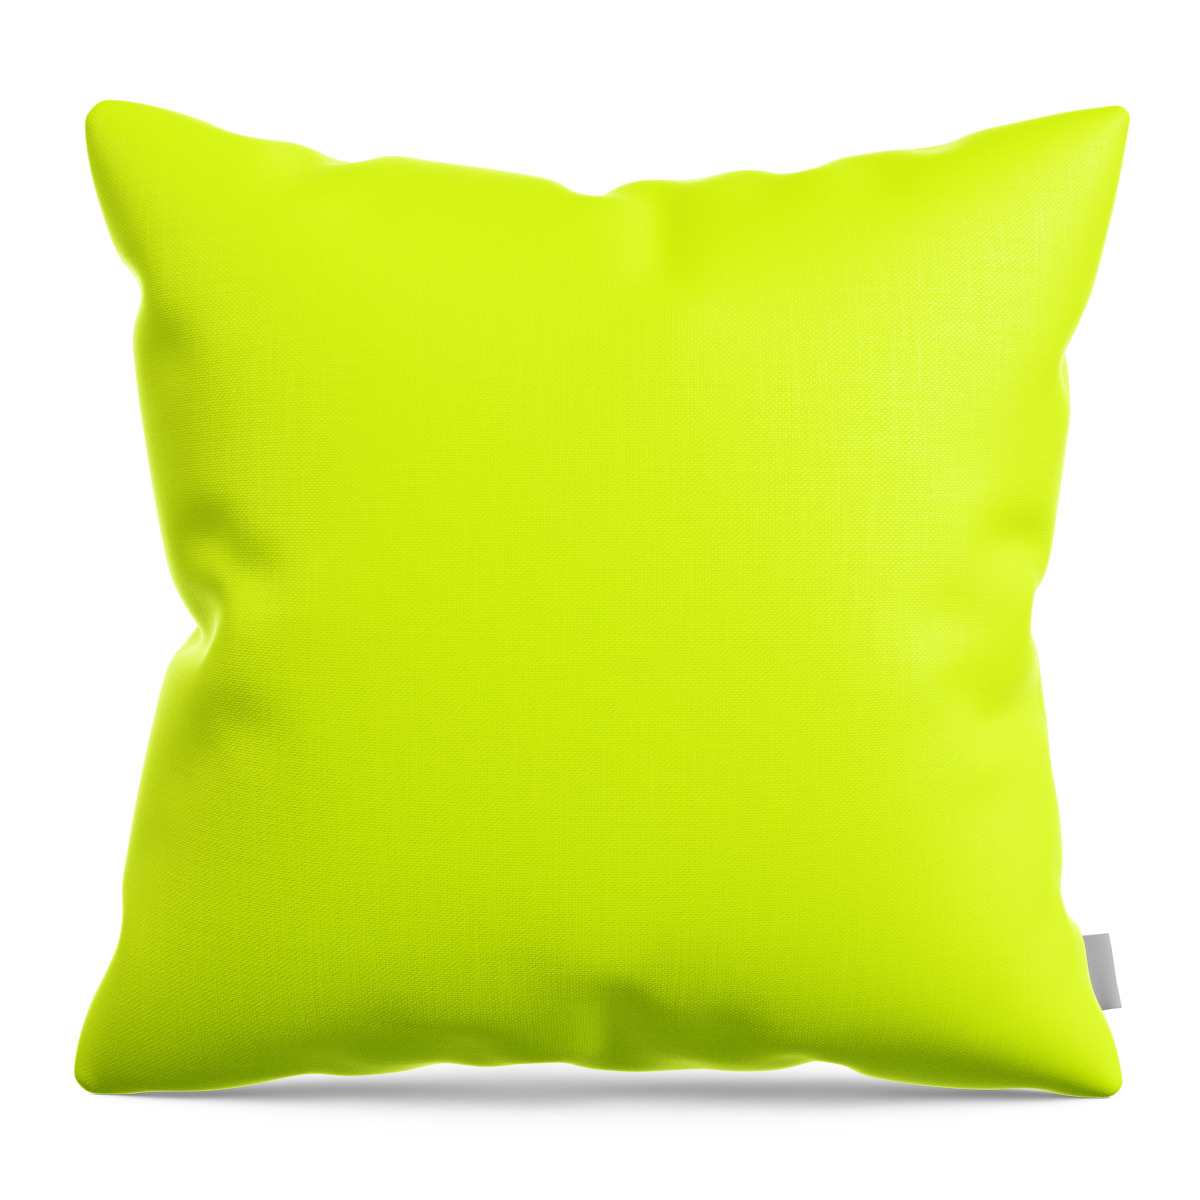 Bright Chartreuse Throw Pillow featuring the digital art Bright Chartreuse by TintoDesigns